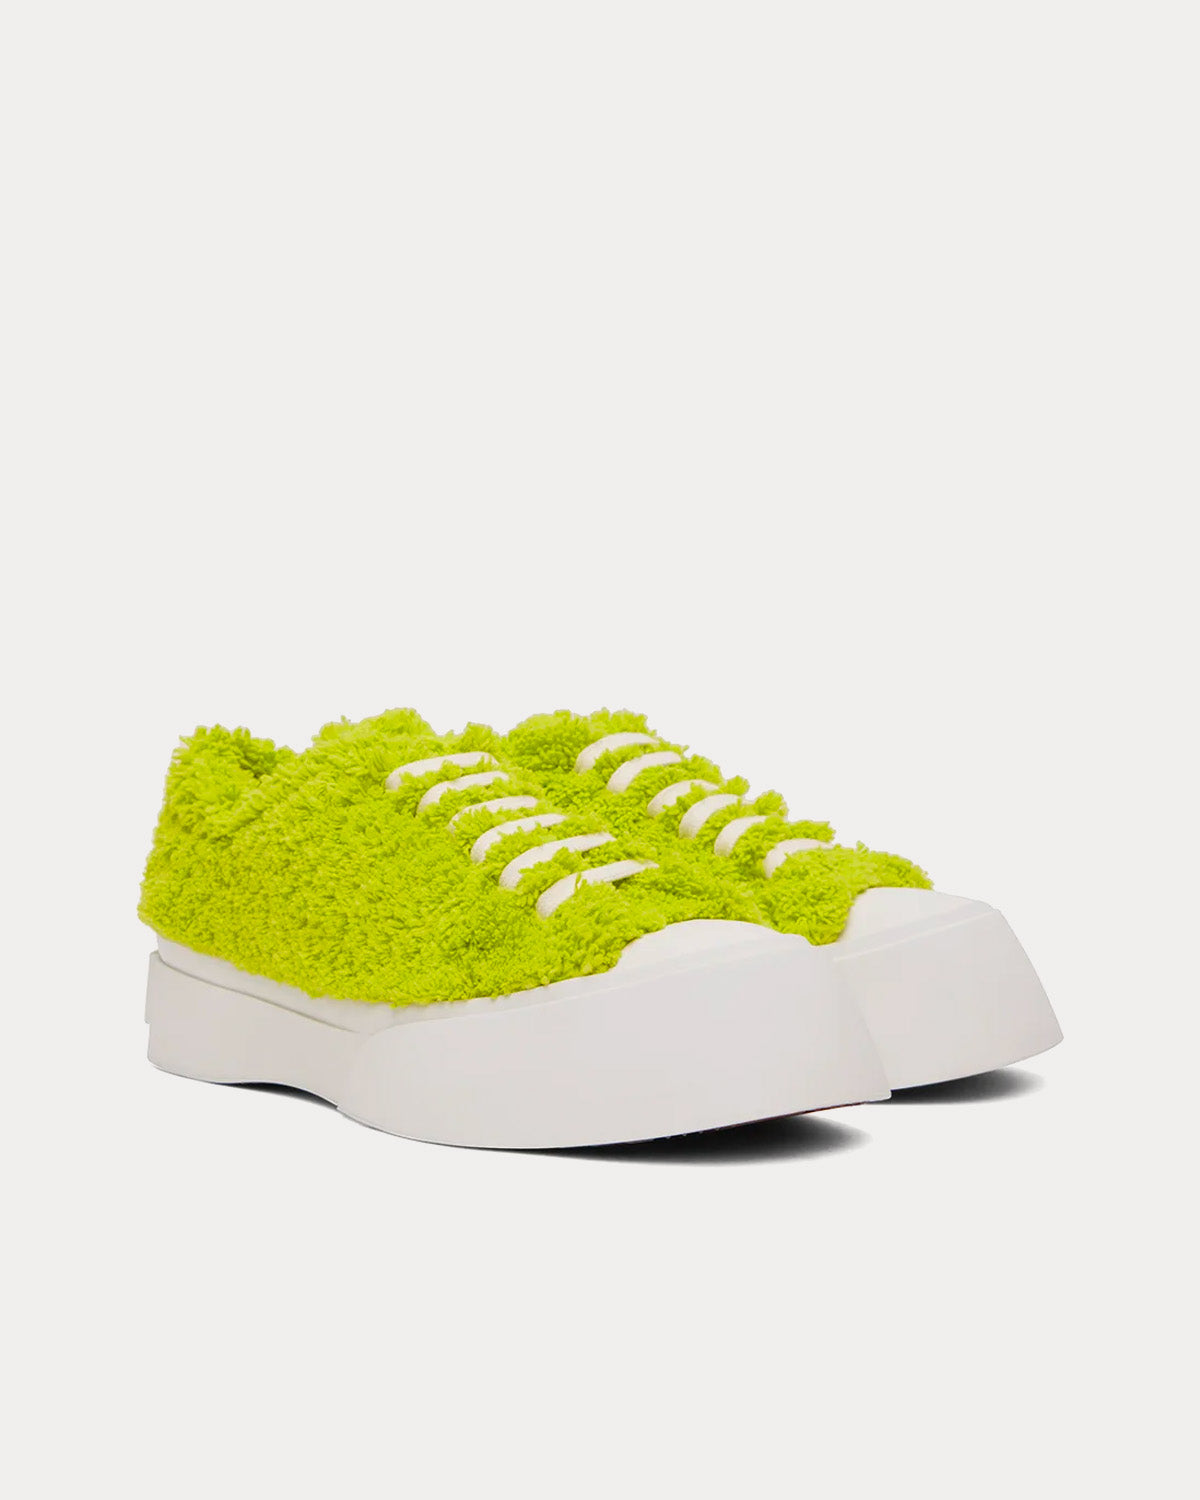 Marni - Pablo Terry Green Low Top Sneakers